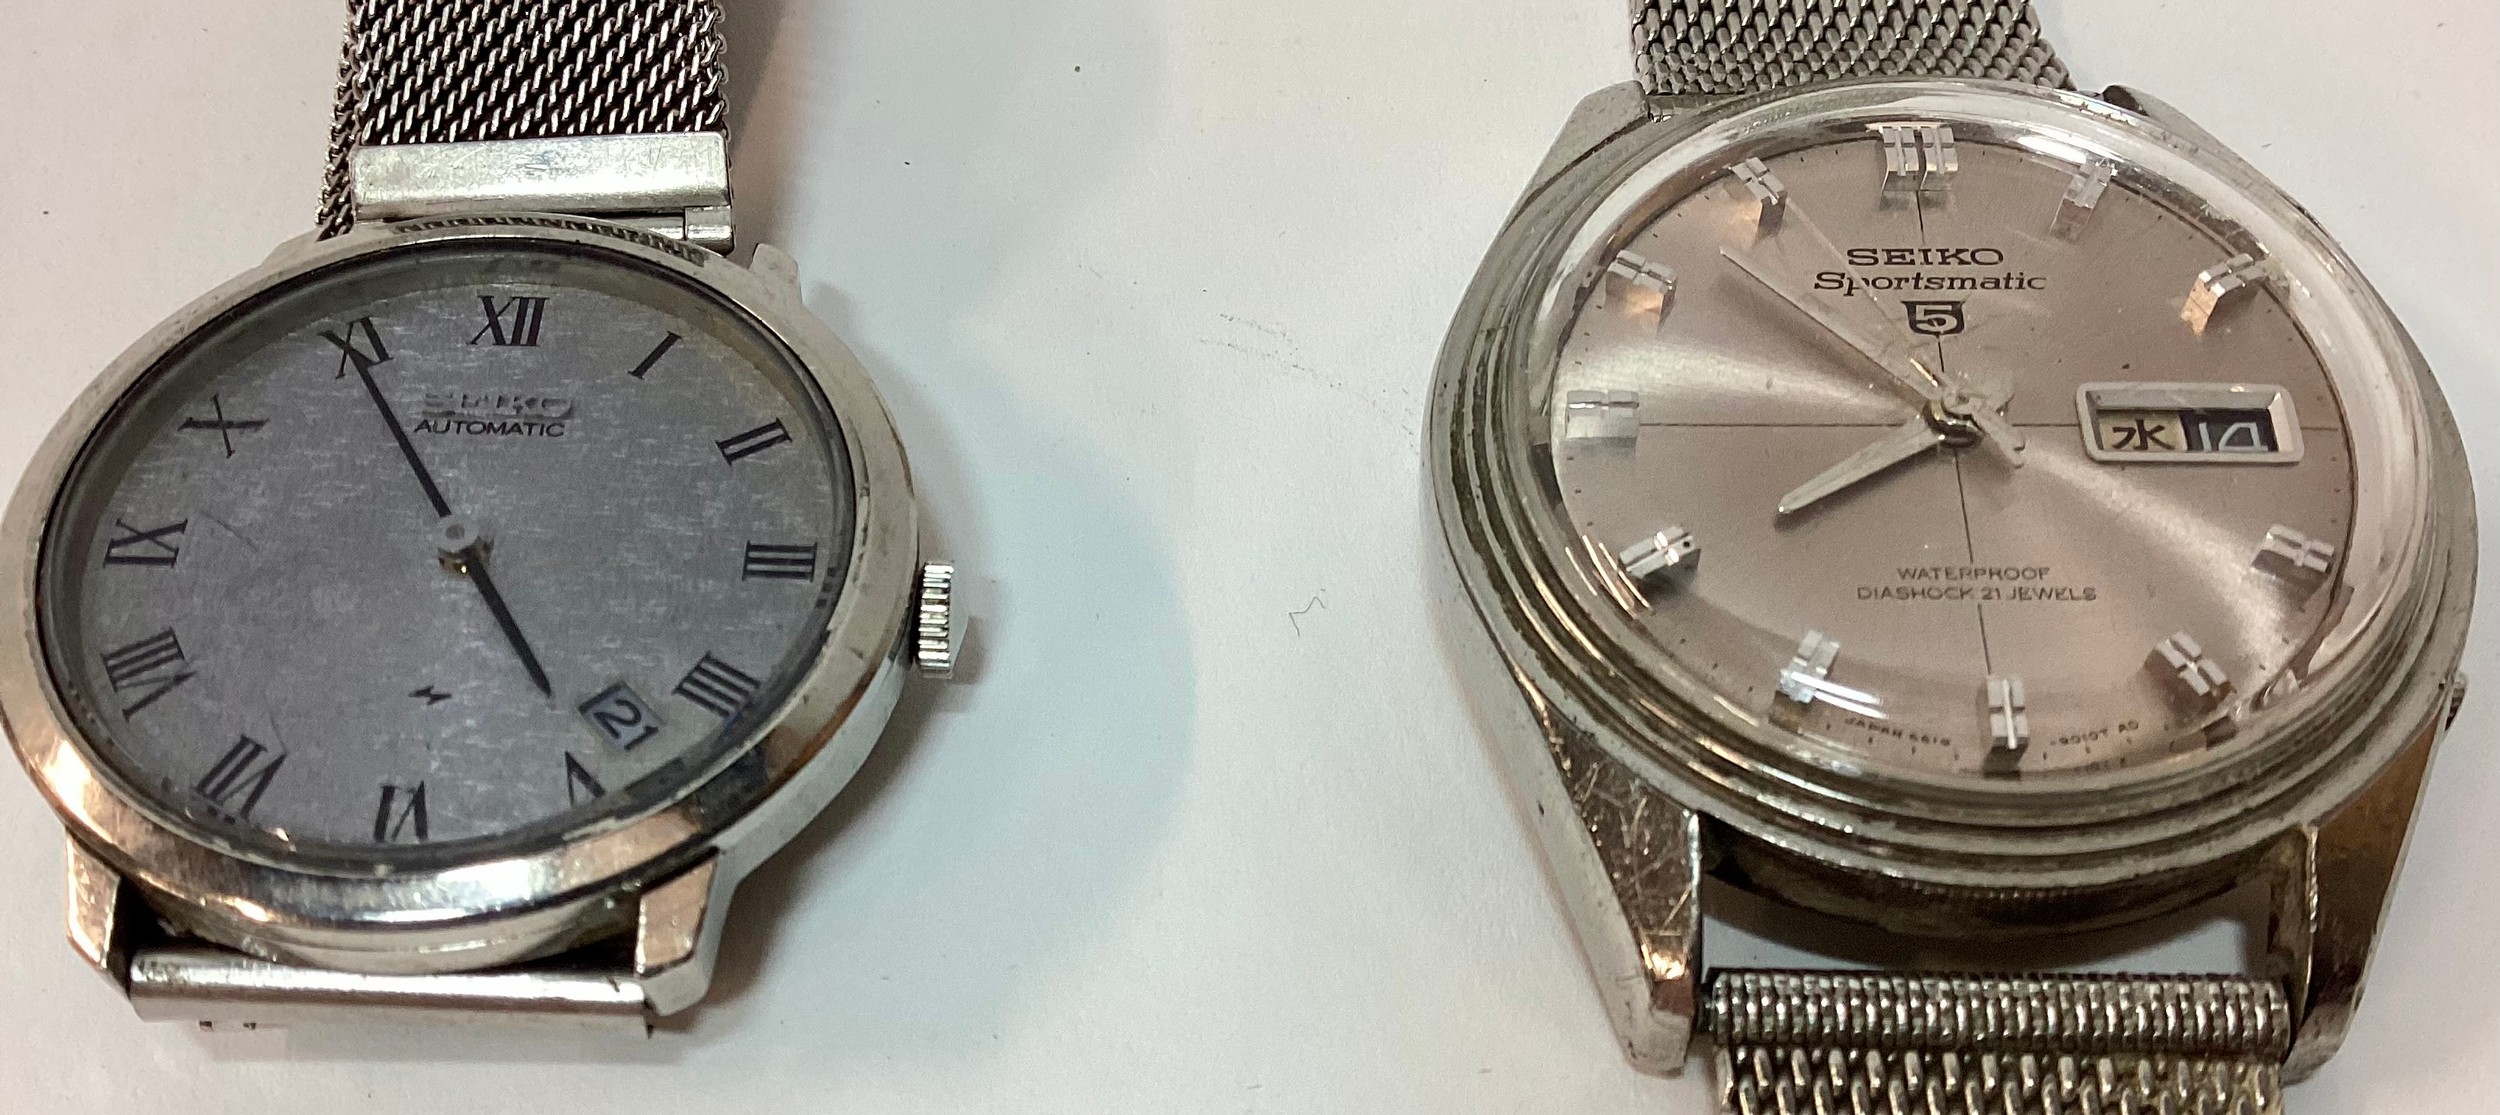 A collection of gents vintage Seiko automatic watches including Actus, Sportsmatic and Marvel - Image 5 of 5